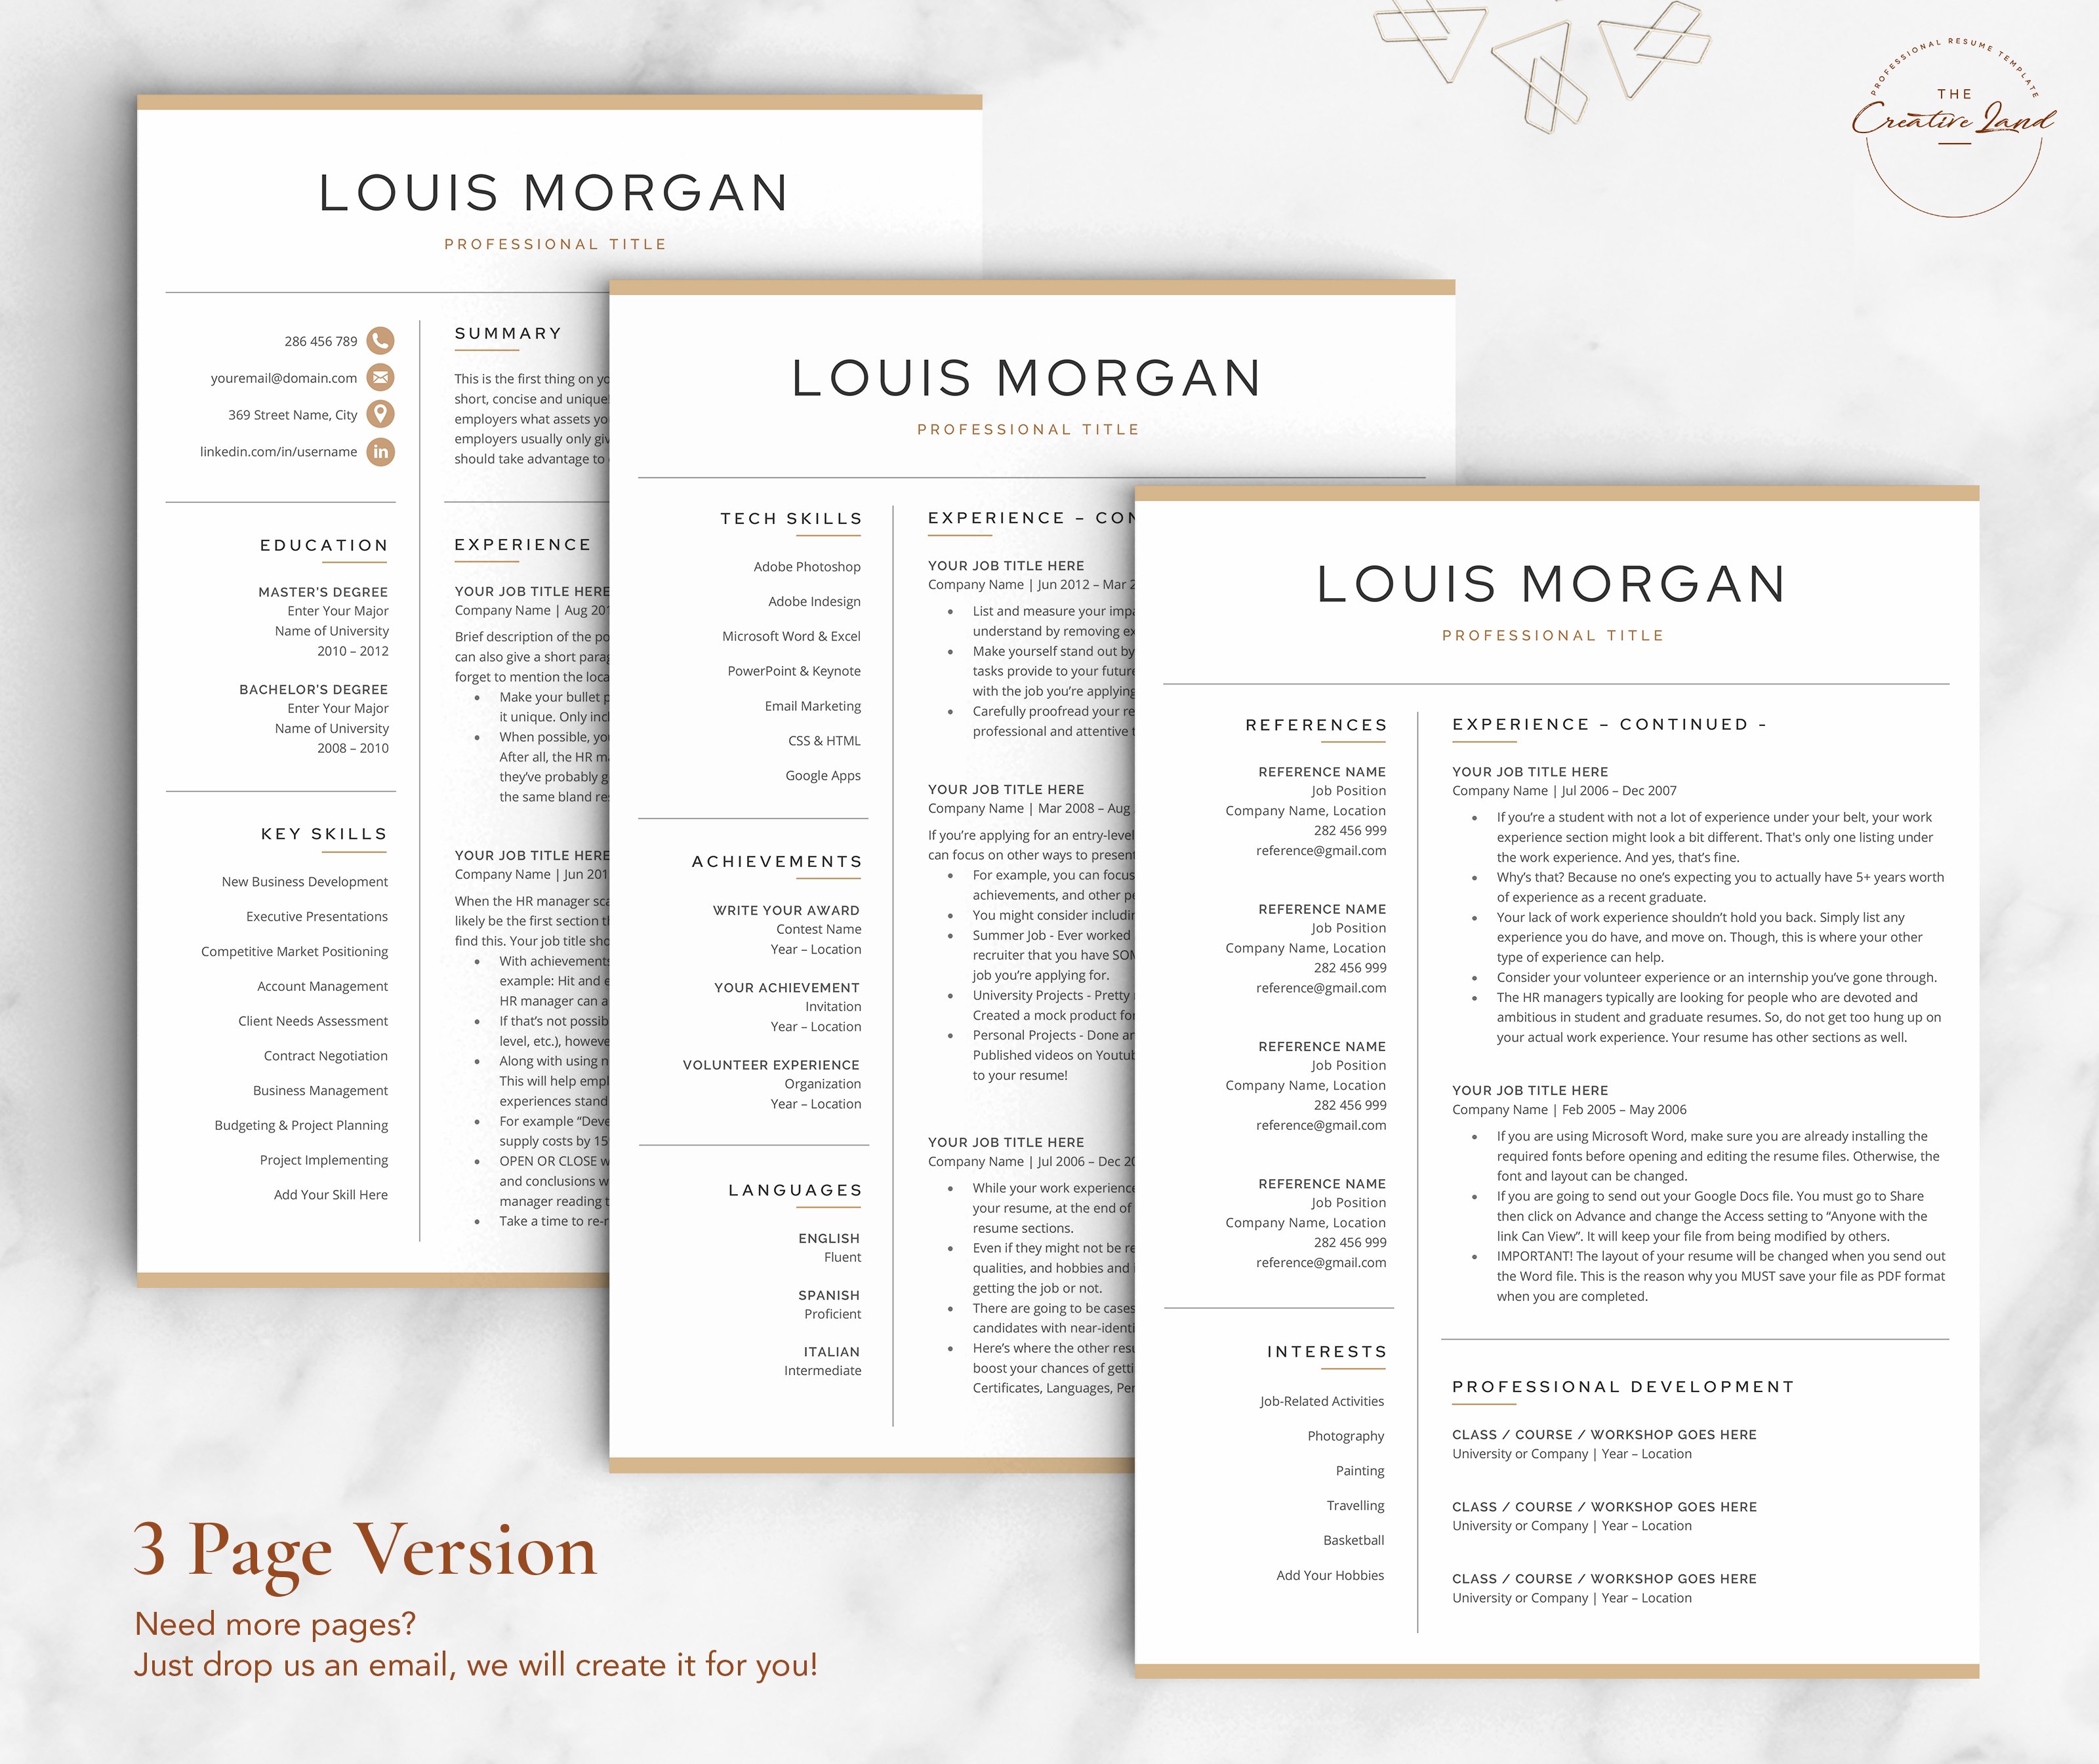 Three pages of a resume template on a marble background.